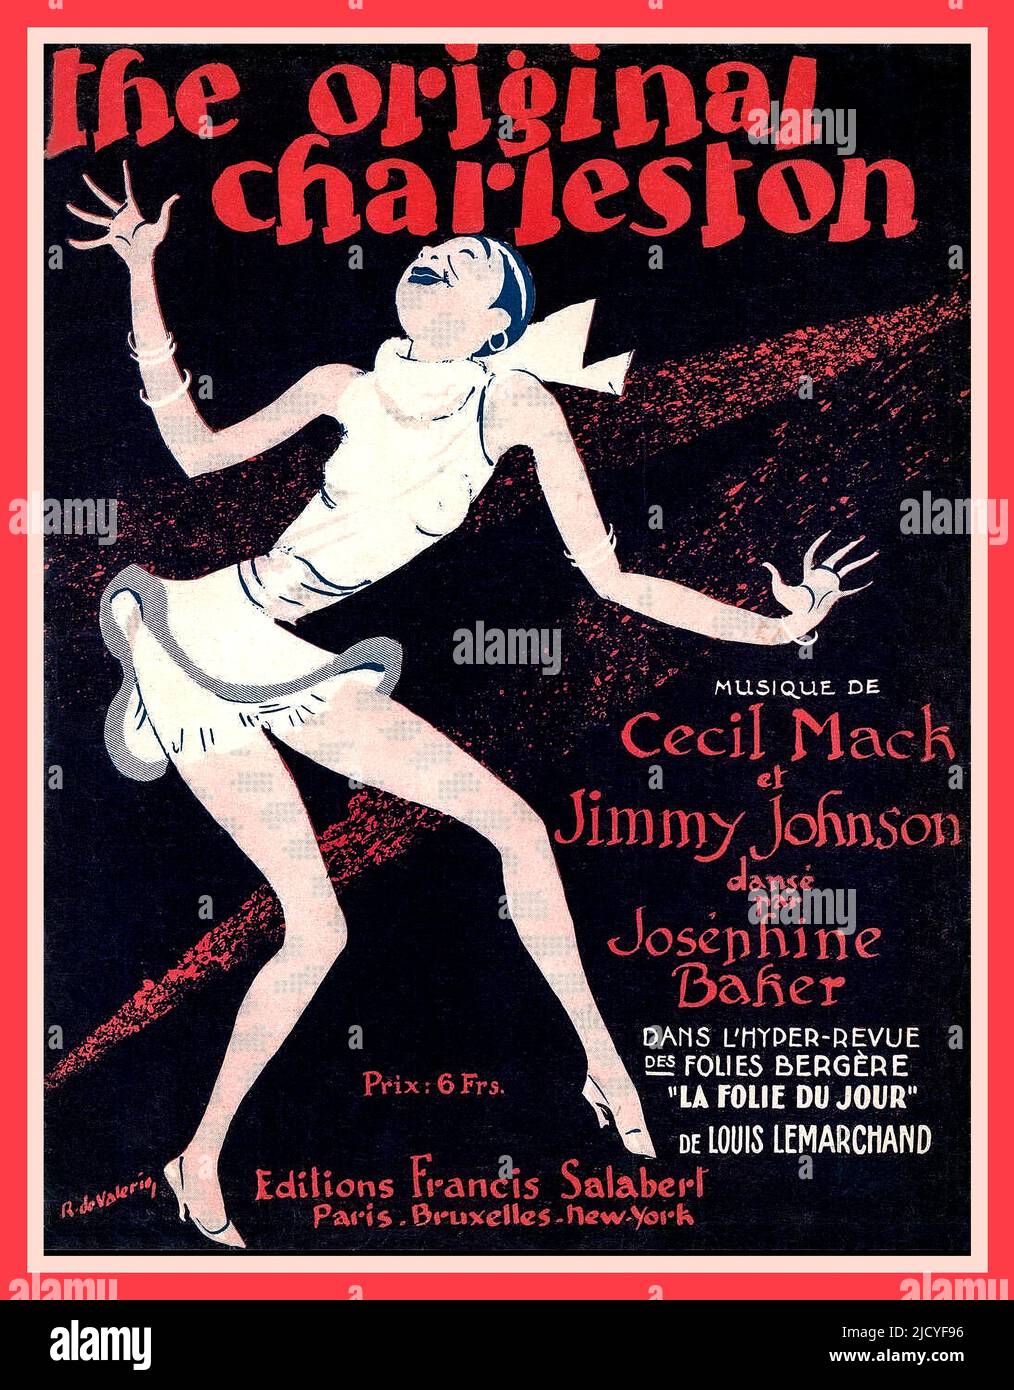 The Original Charleston Sheet Music 1900s Front Cover Music by Cecil Mack and Jimmy Johnson, with dance by Josephine Baker in the L'Hyder Revue Folies Bergere, 'La Folie Du Jour' Paris France Stock Photo